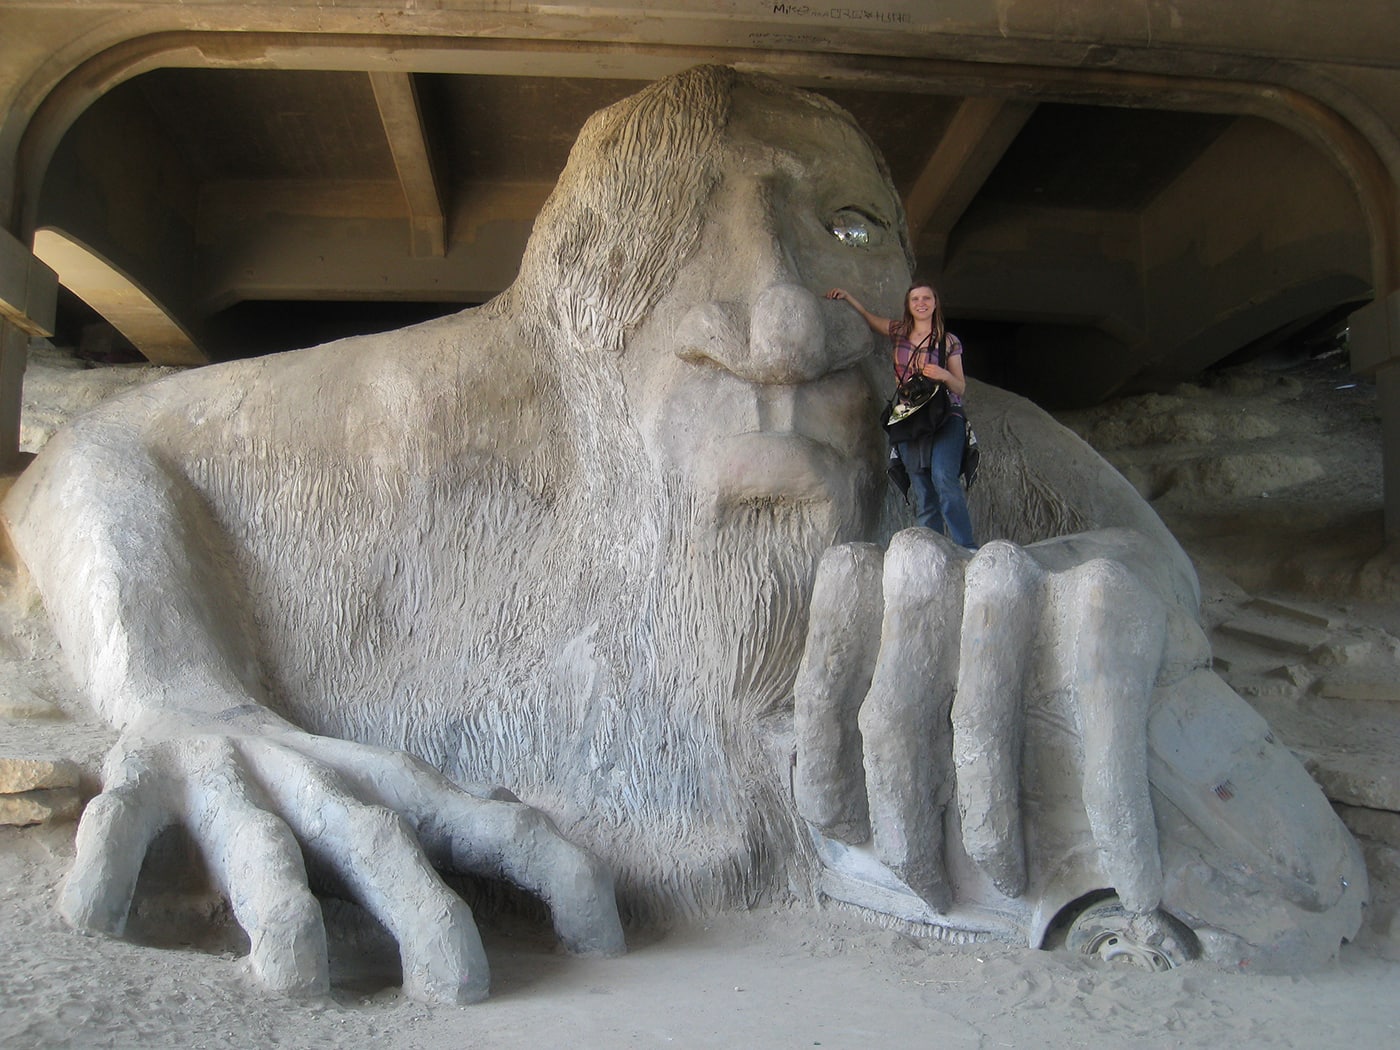 Val and the Fremont Troll, a roadside attraction in Seattle, Washington.